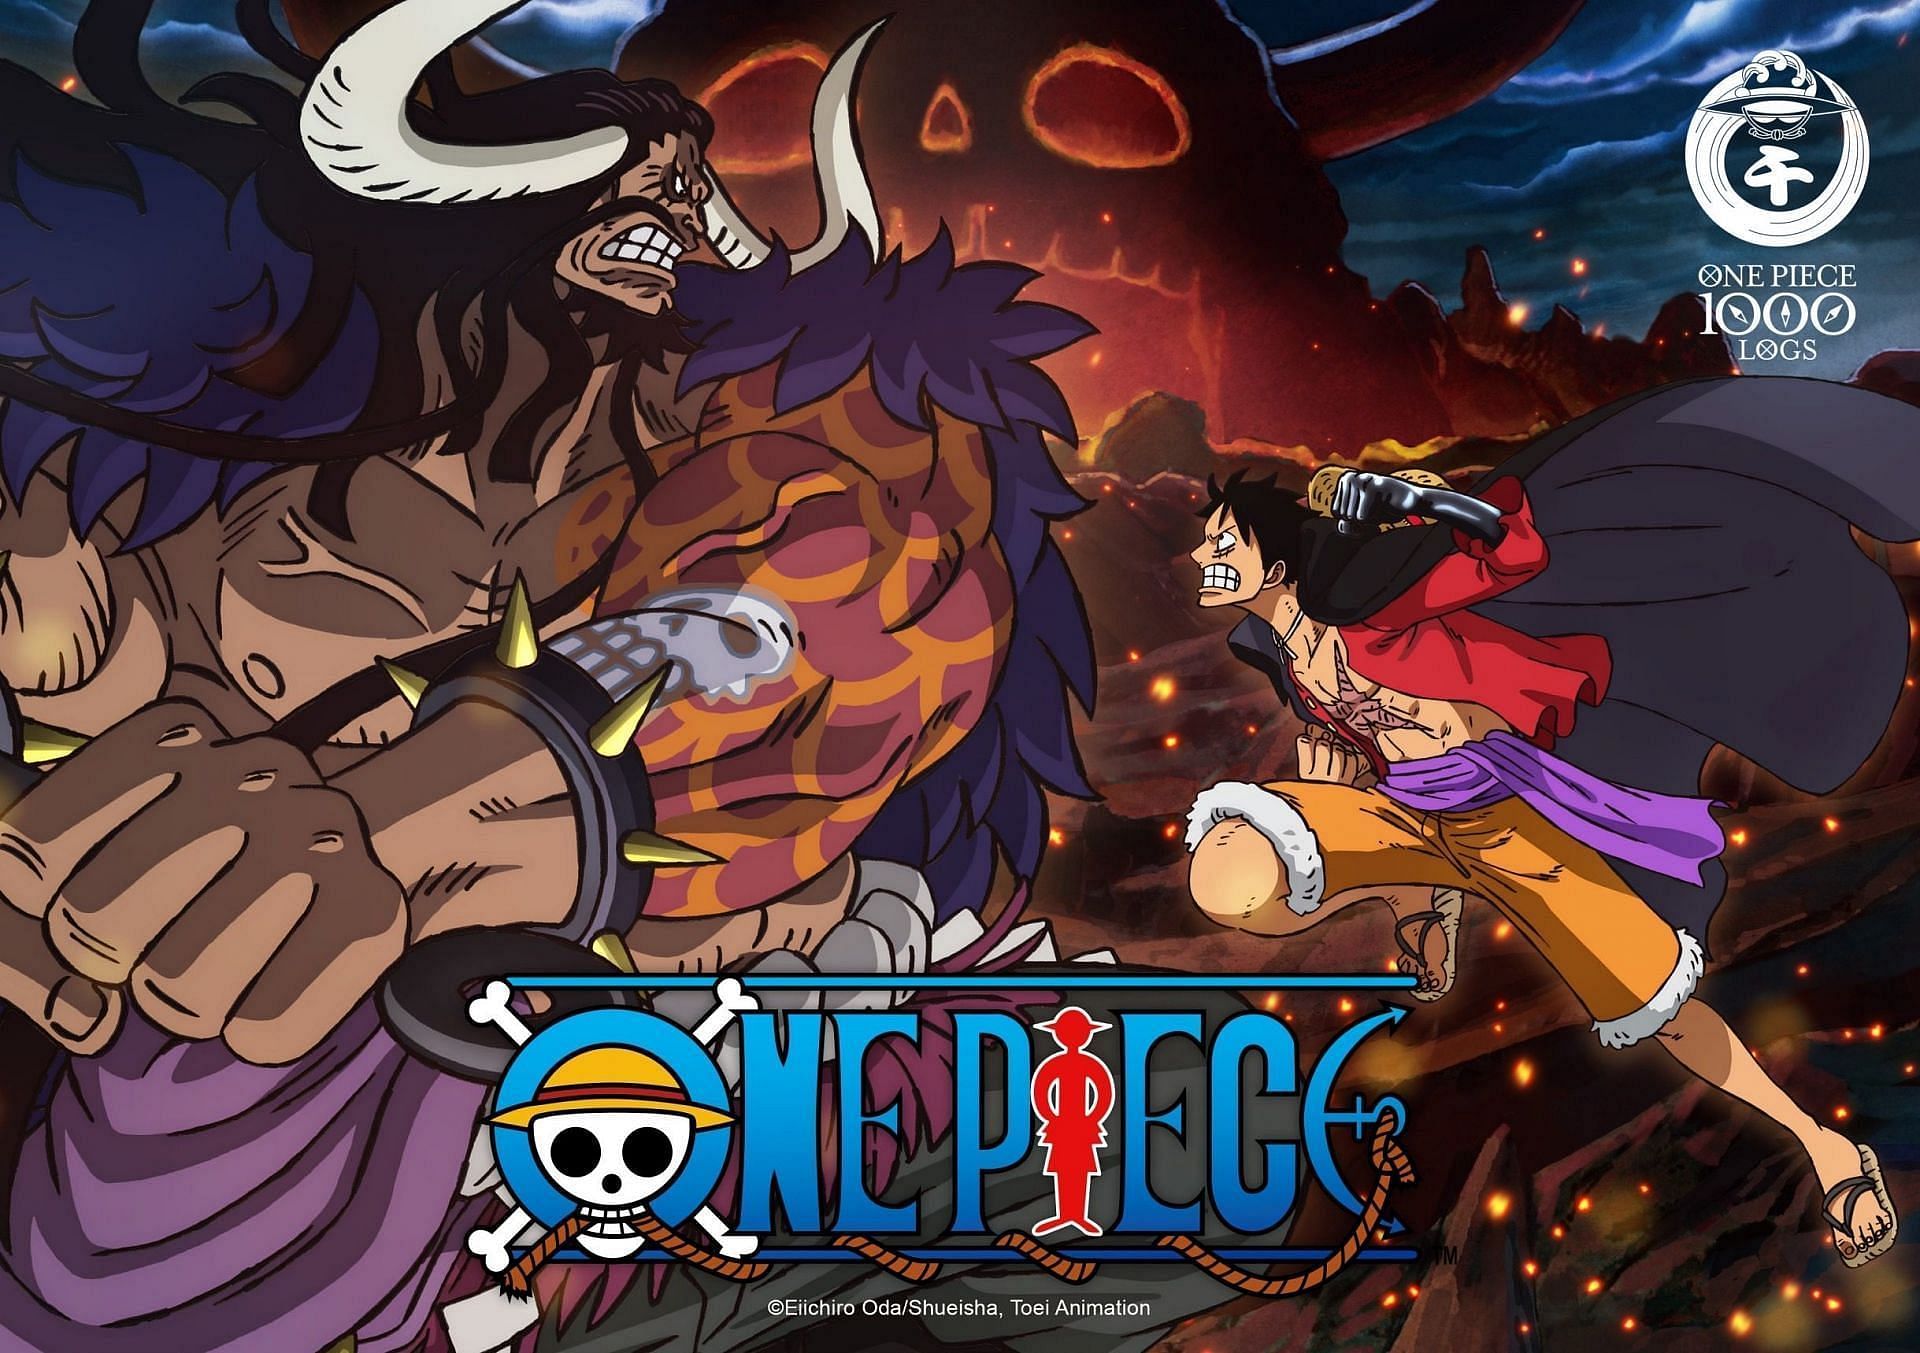 Where can one watch the much-awaited One Piece Episode 1000 (Image via Toei Animation)